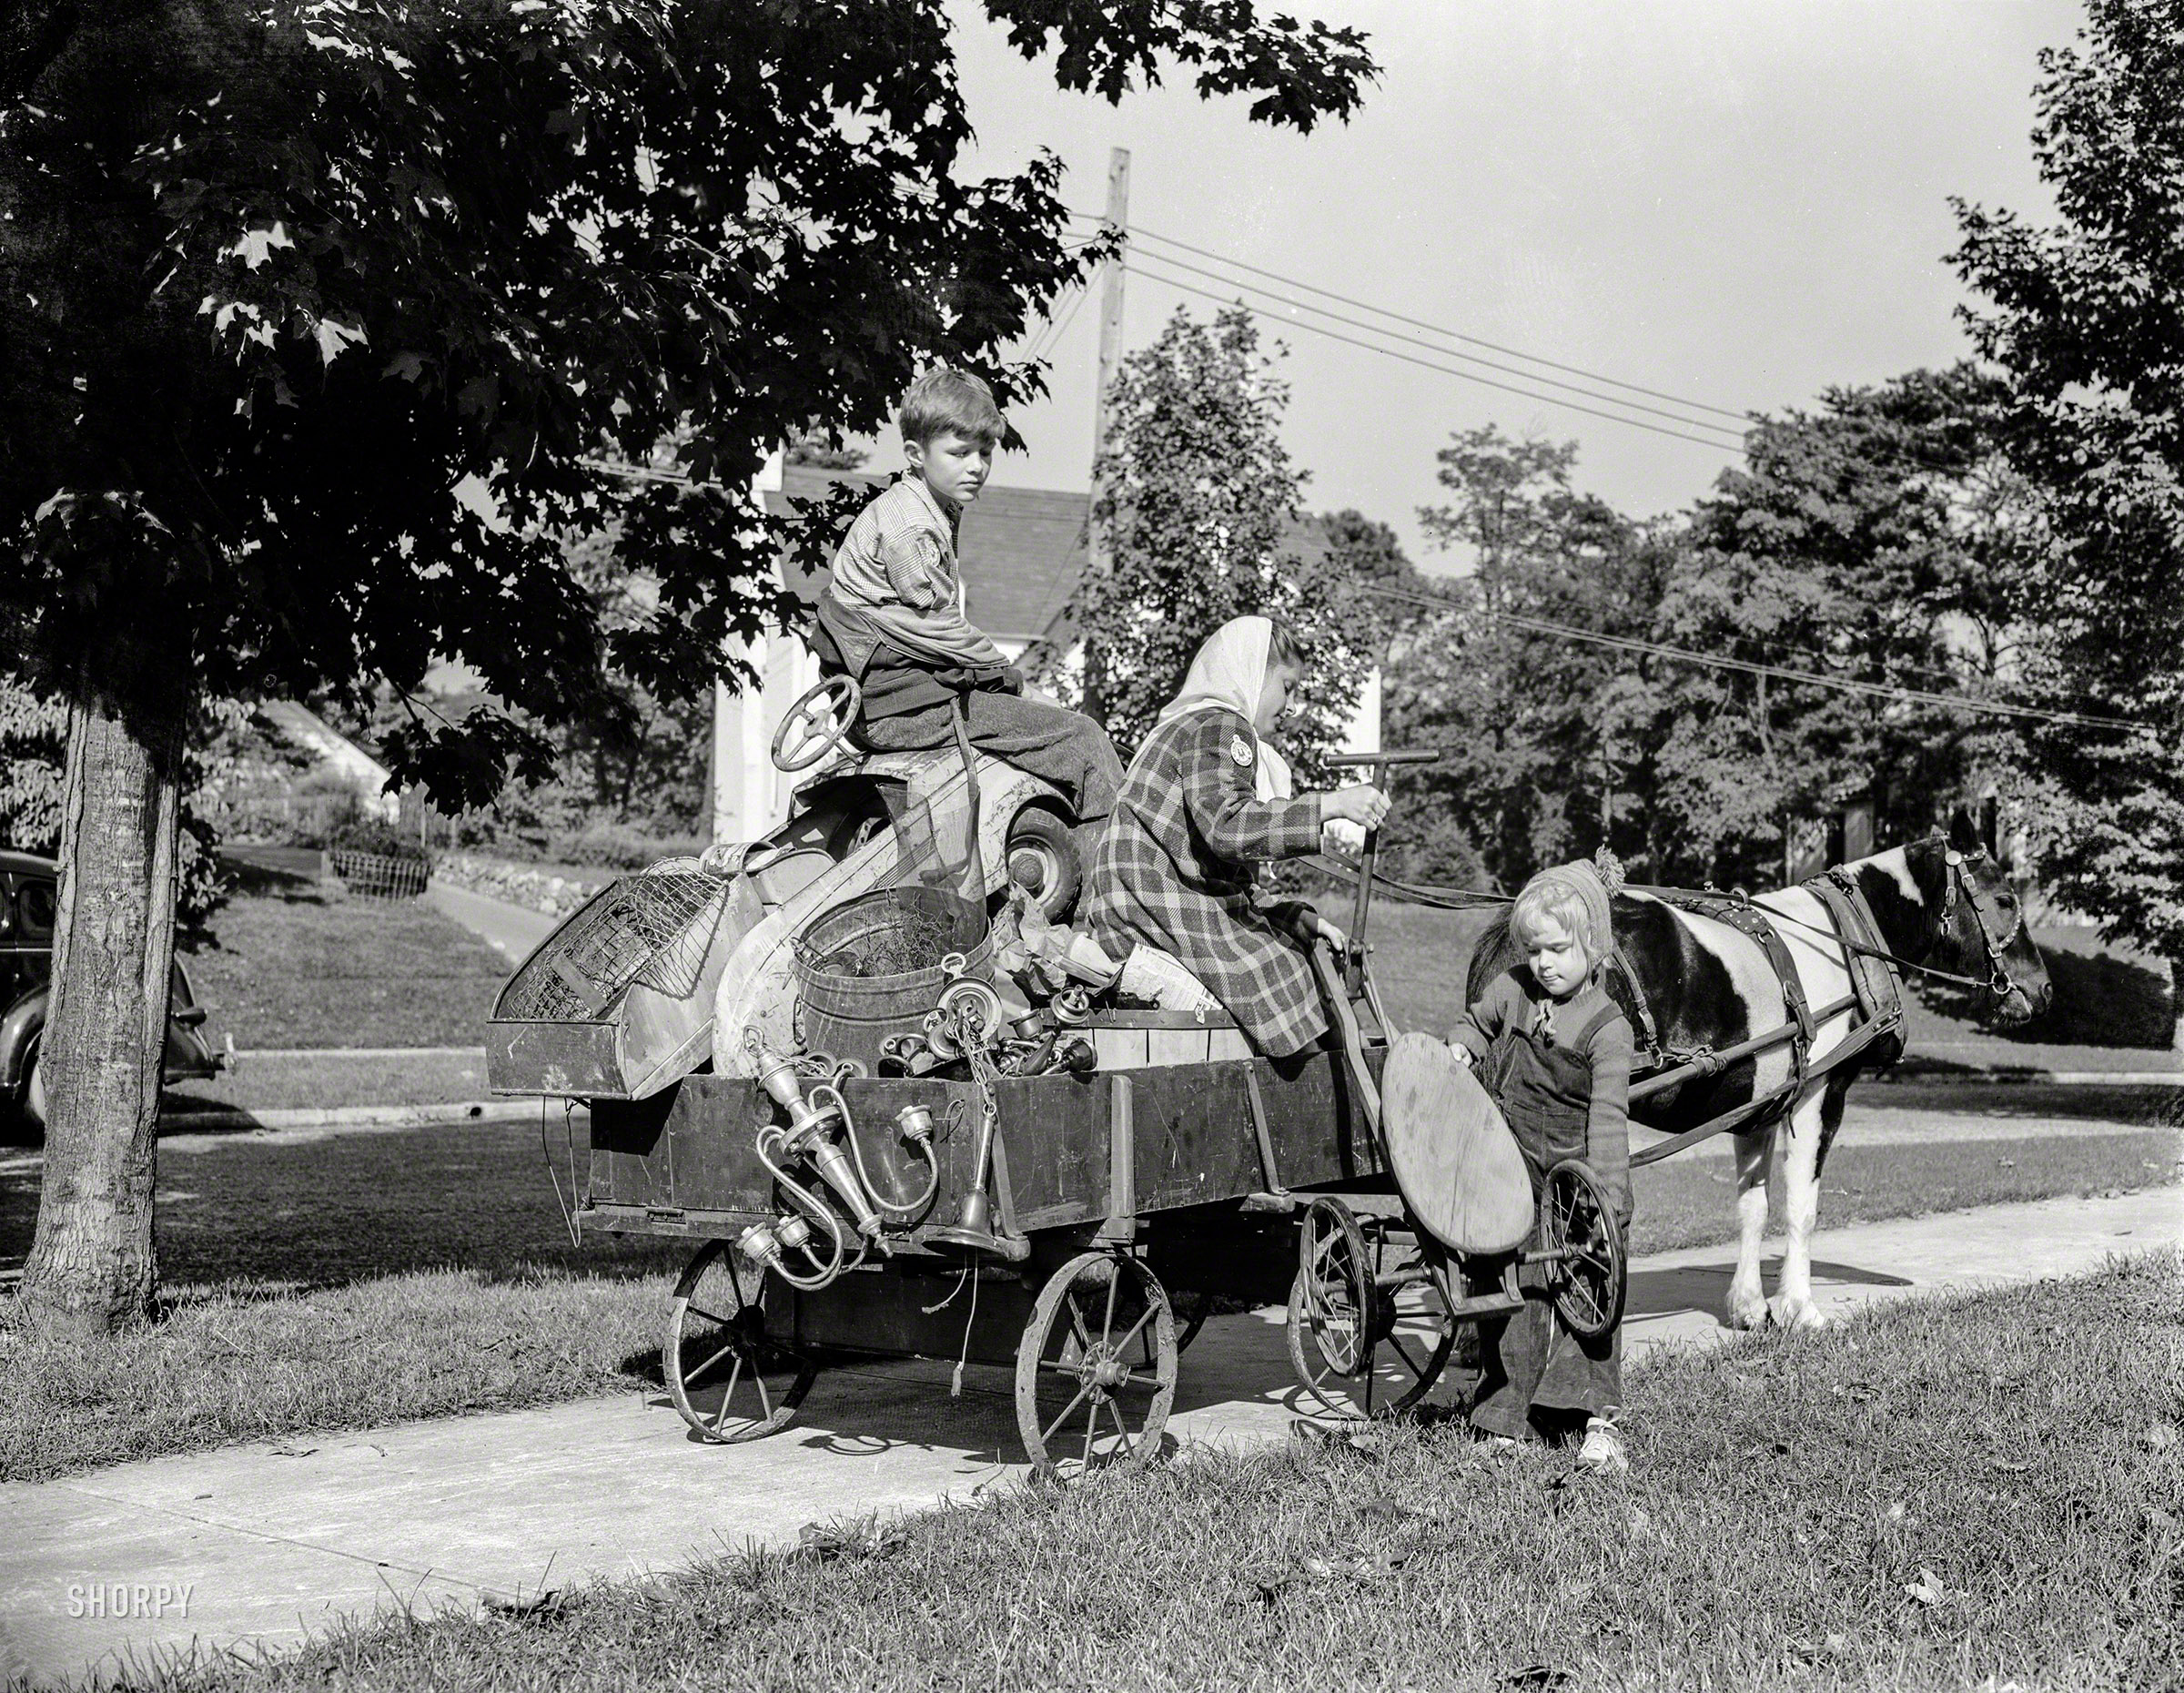 October 1942. "Manpower, junior size. The charge of the scrap brigade in Roanoke, Virginia, includes such methods of collecting as this pony cart. The patriotic and energetic youngsters of the town are making an all-out effort to corner every available piece of scrap in the city, so that their soldier and sailor brothers will have the shells, guns, and tanks with which to beat the Axis." 4x5 inch nitrate negative by Valentino Sarra for the Office of War Information. View full size.